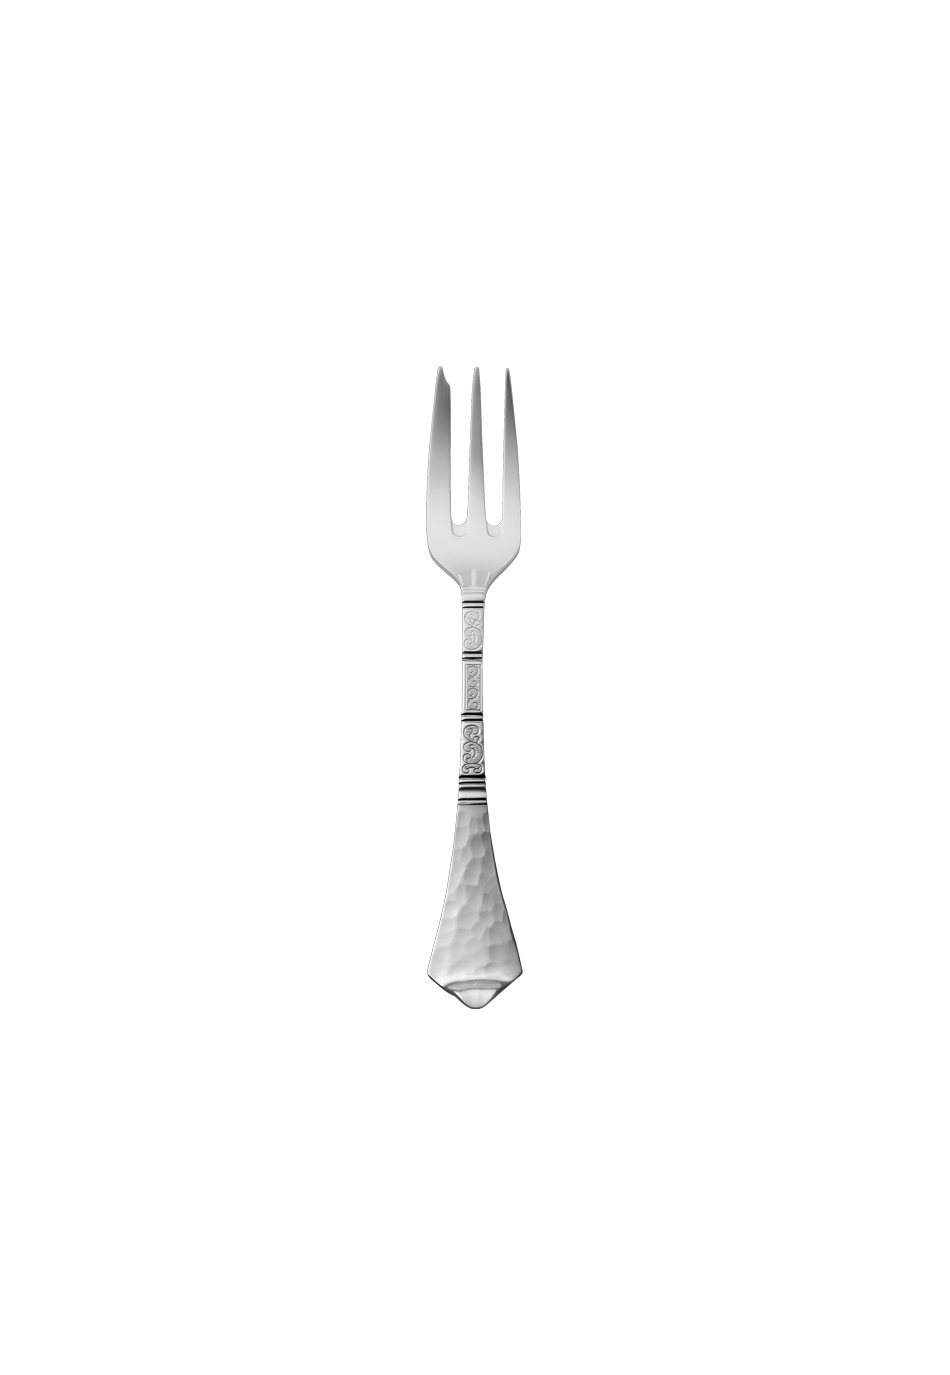 Hermitage Cake Fork (150g massive silverplated)